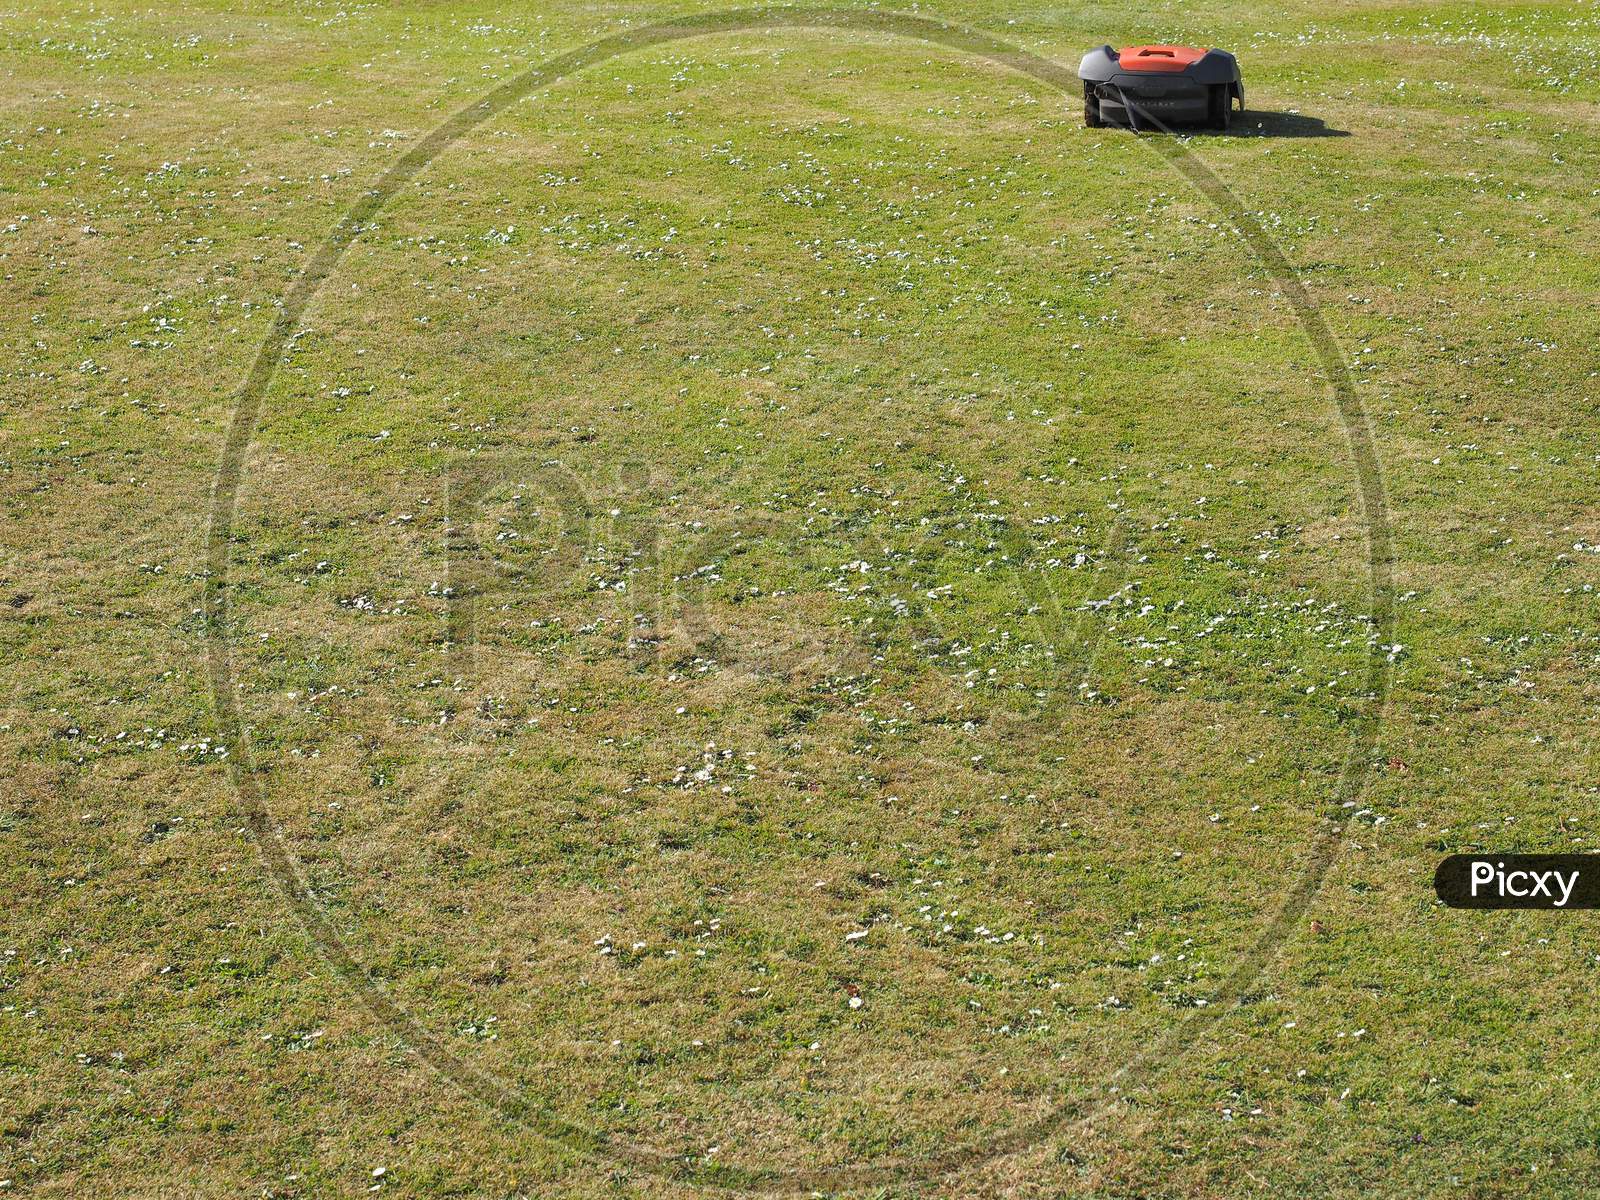 Automatic Lawn Mower Machine At Work In A Public Park